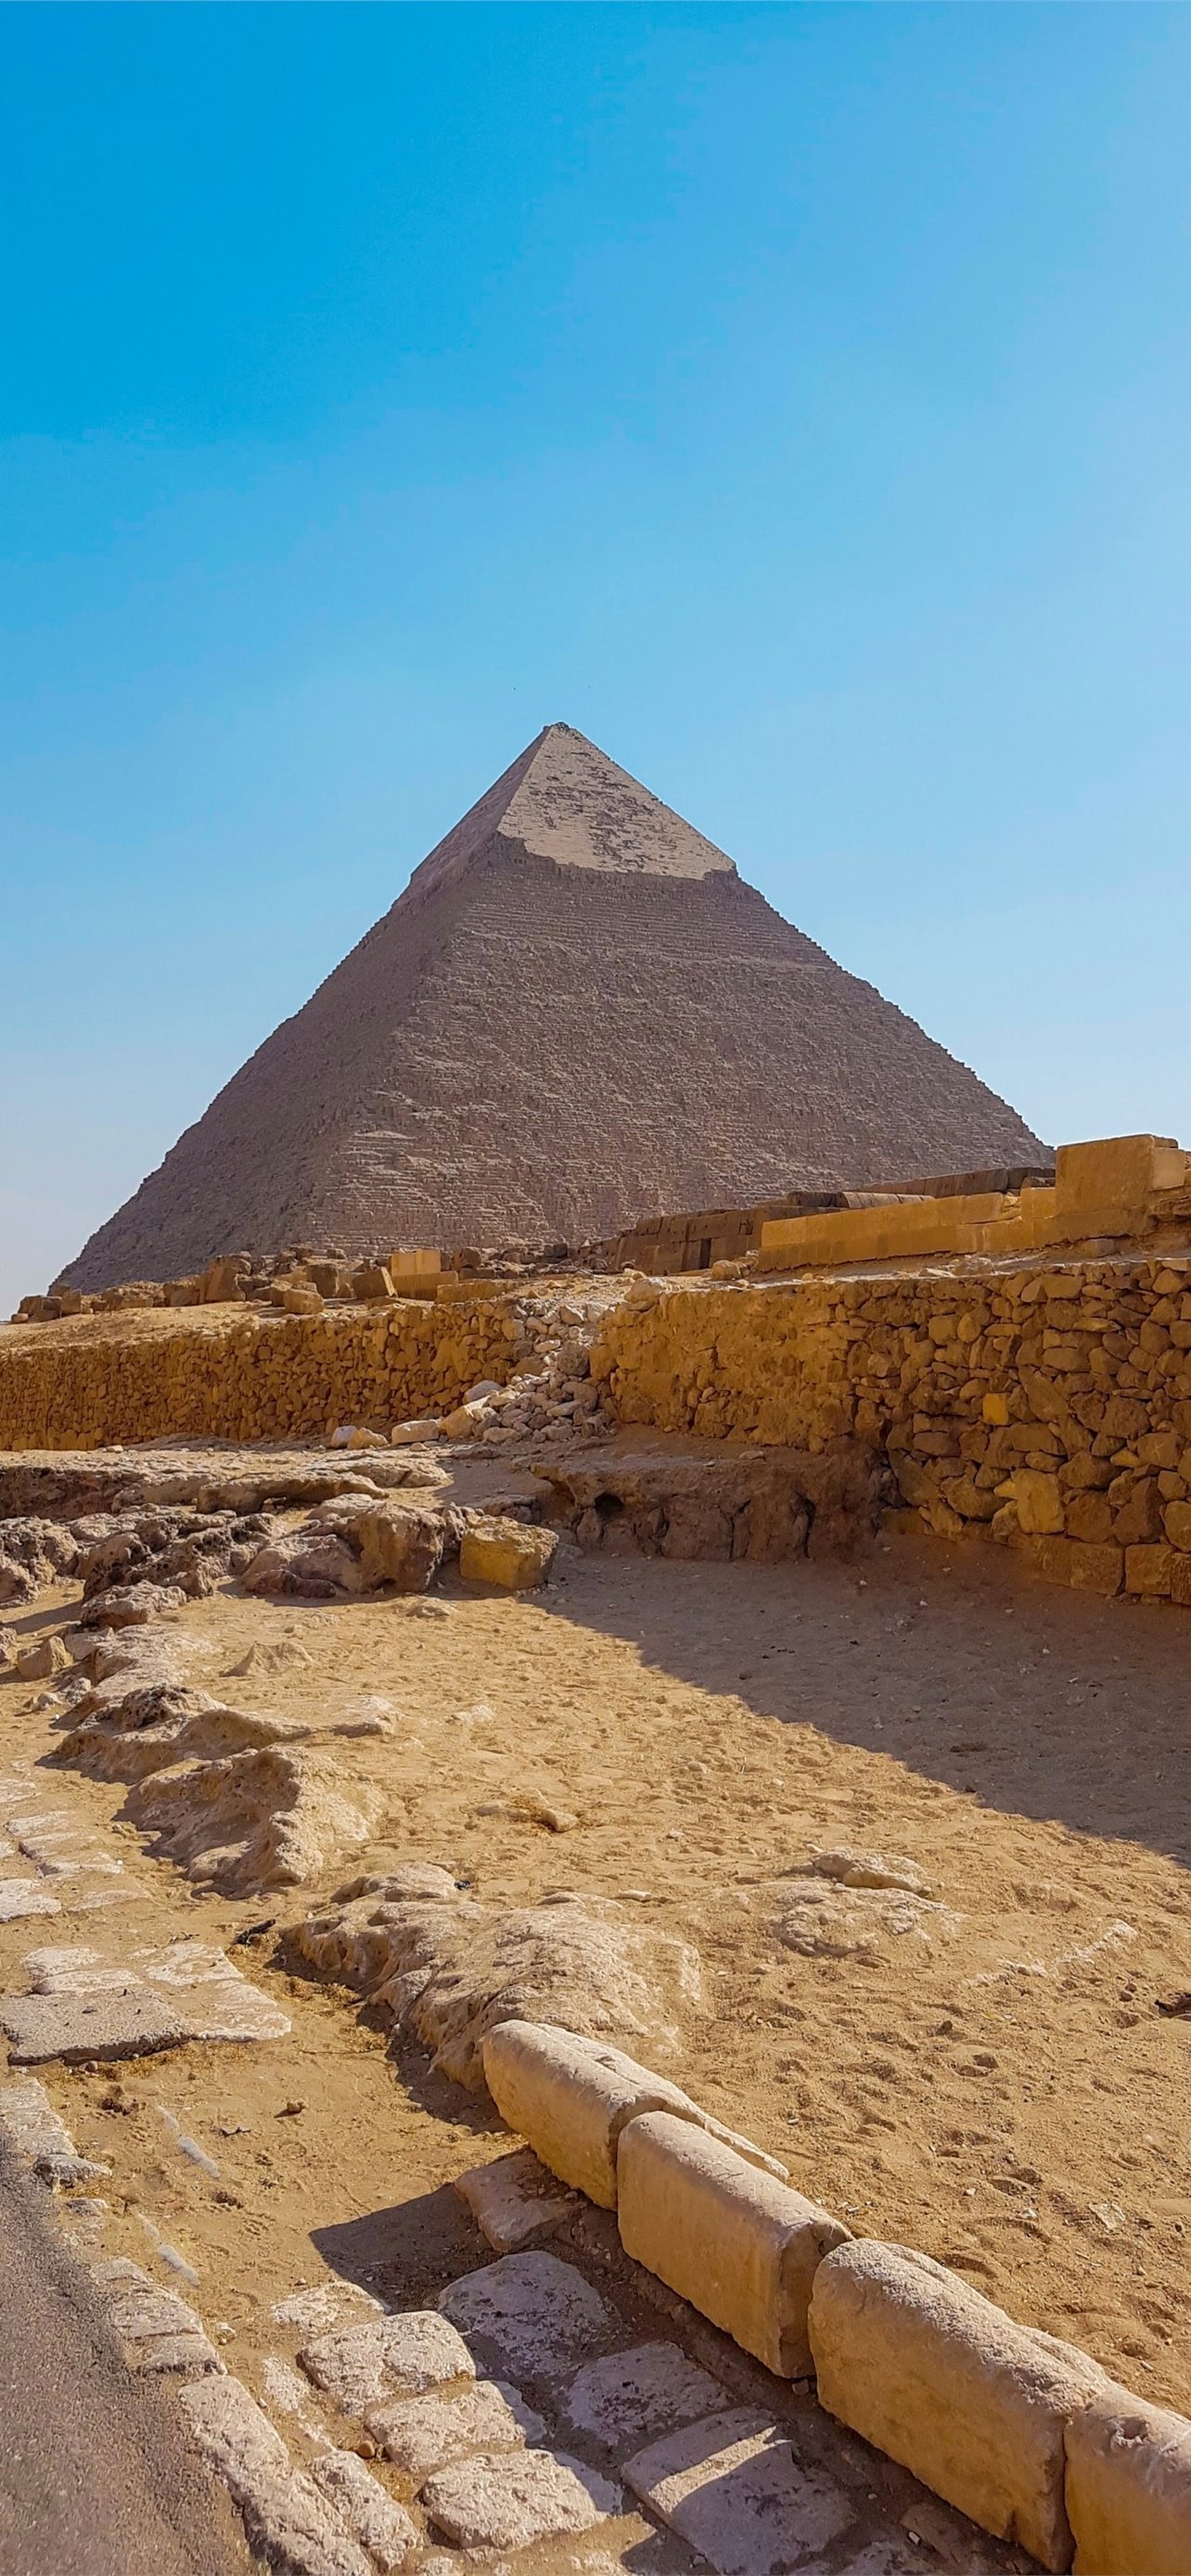 Pyramids of Giza, Best iPhone HD wallpapers, Pyramid admiration, Ancient marvels, 1290x2780 HD Phone